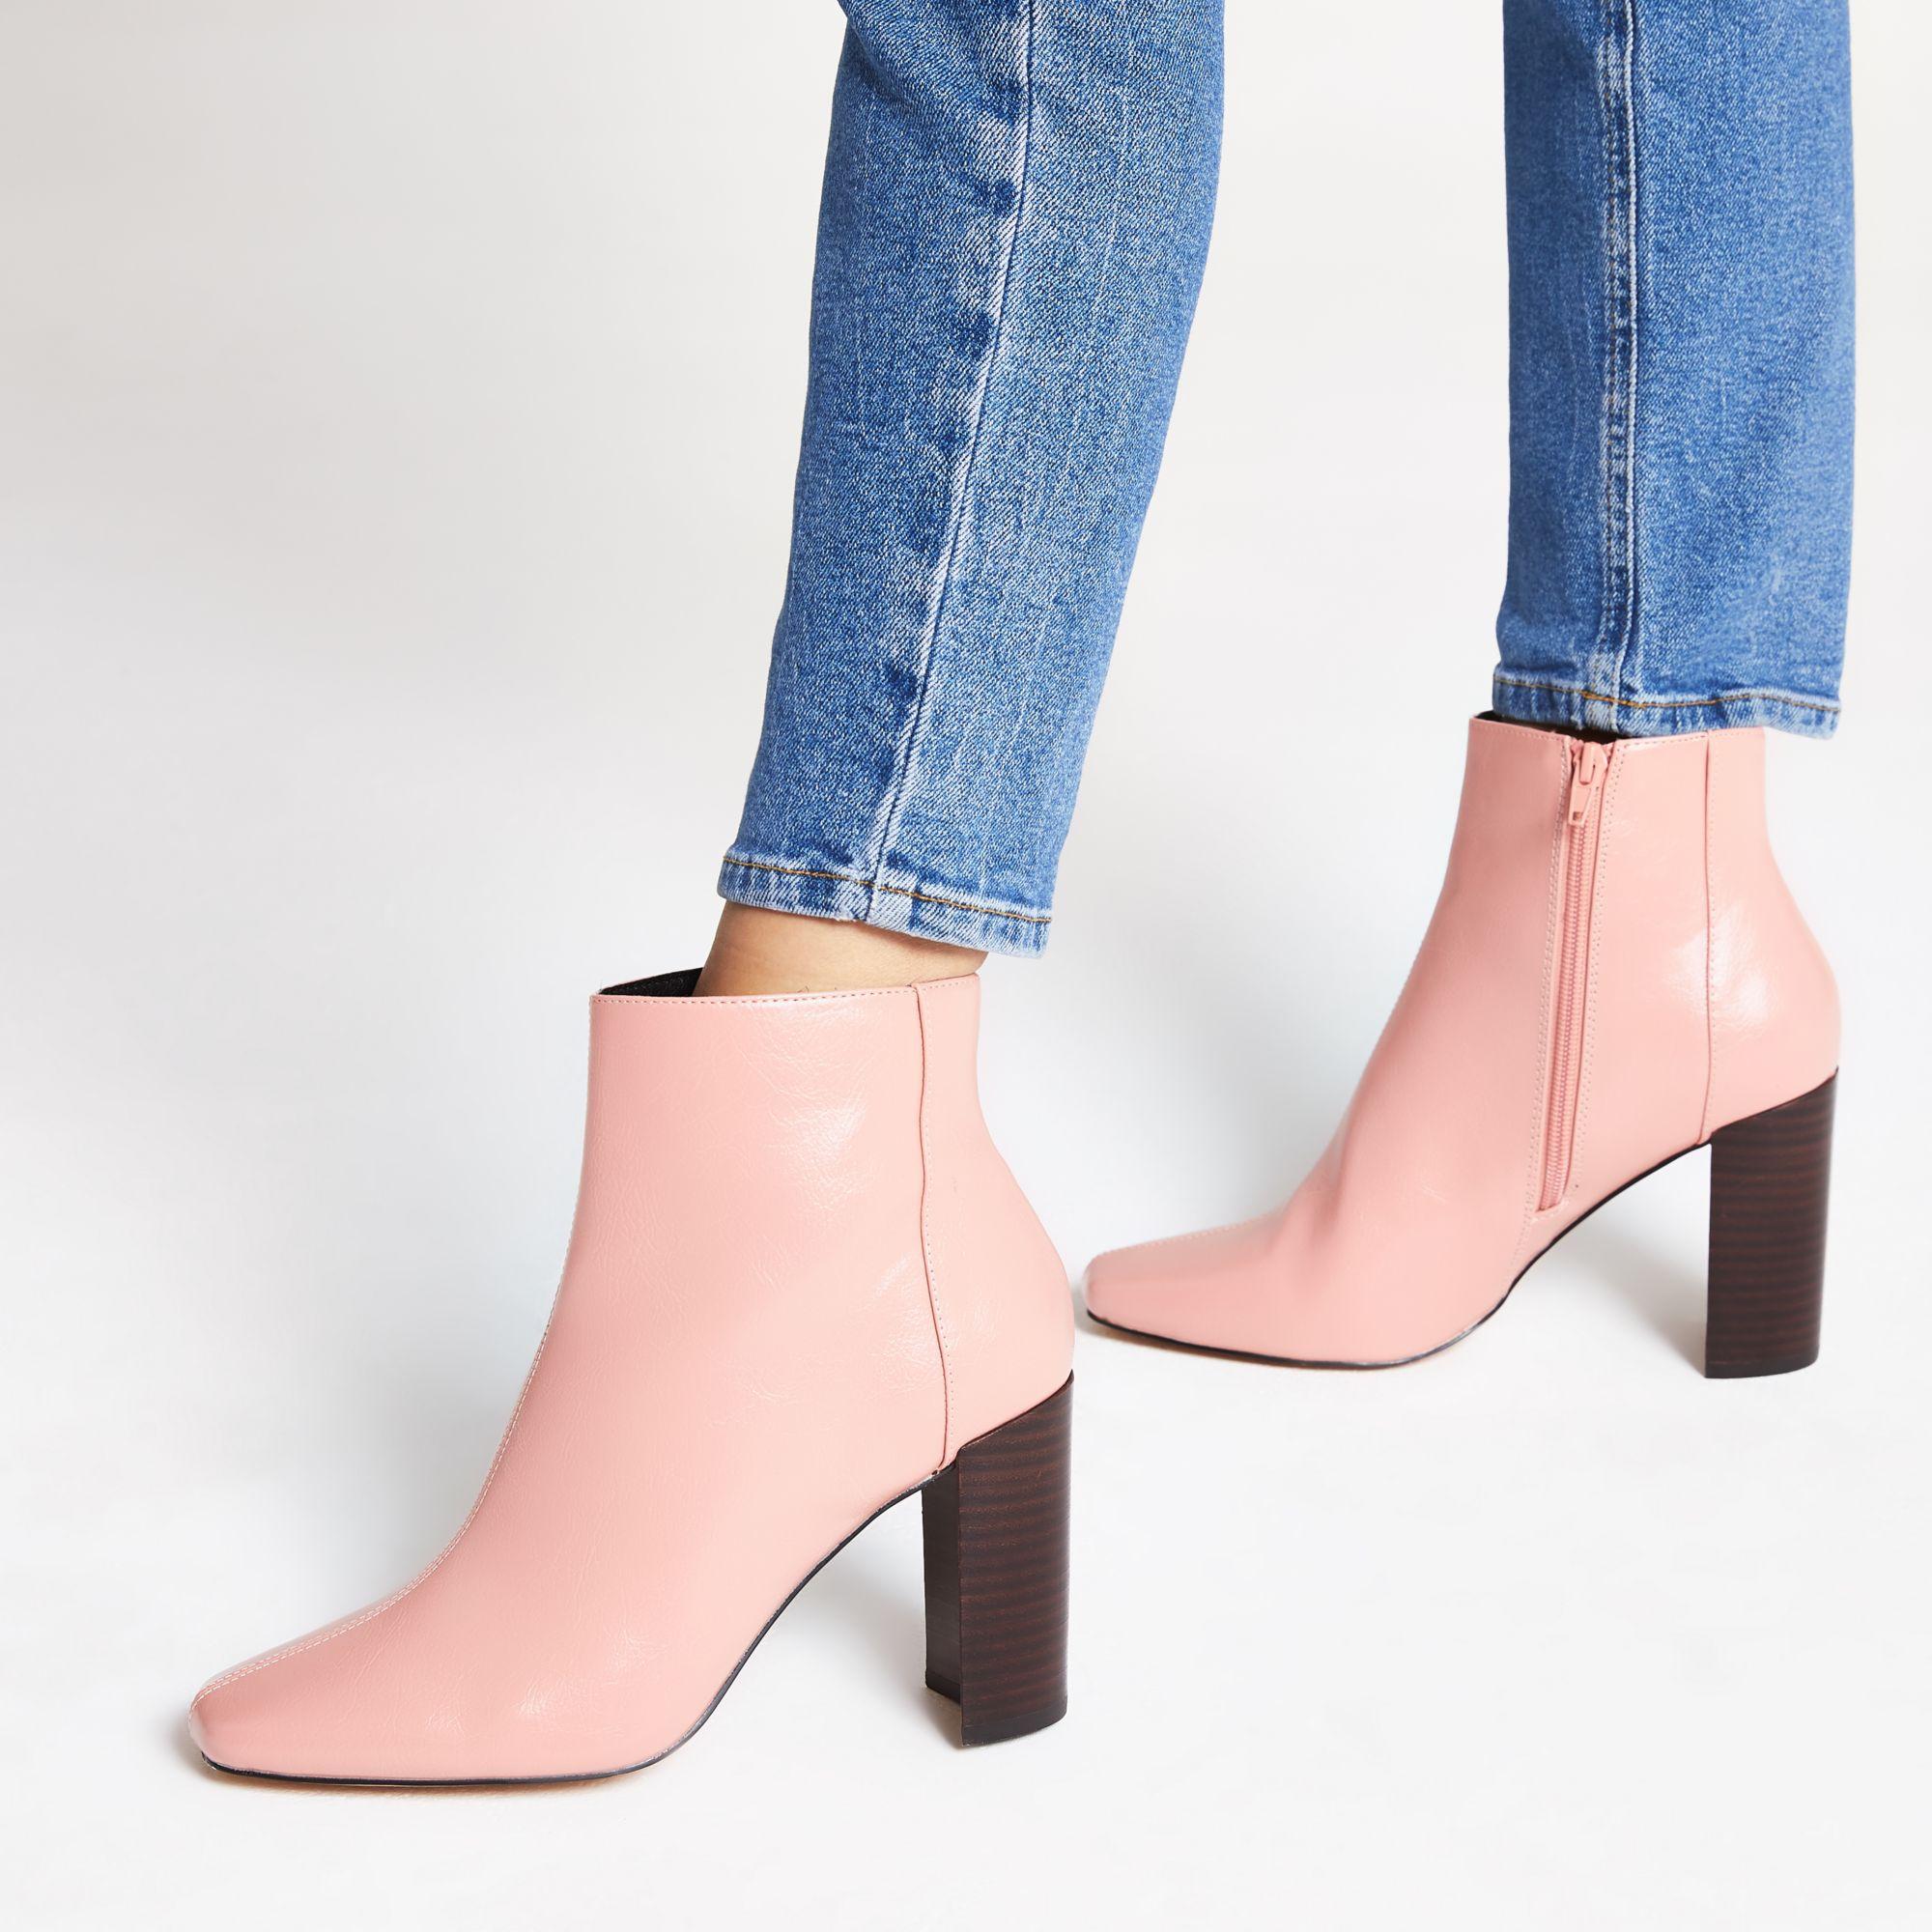 River Island Patent Square Toe Boots in Pink - Lyst